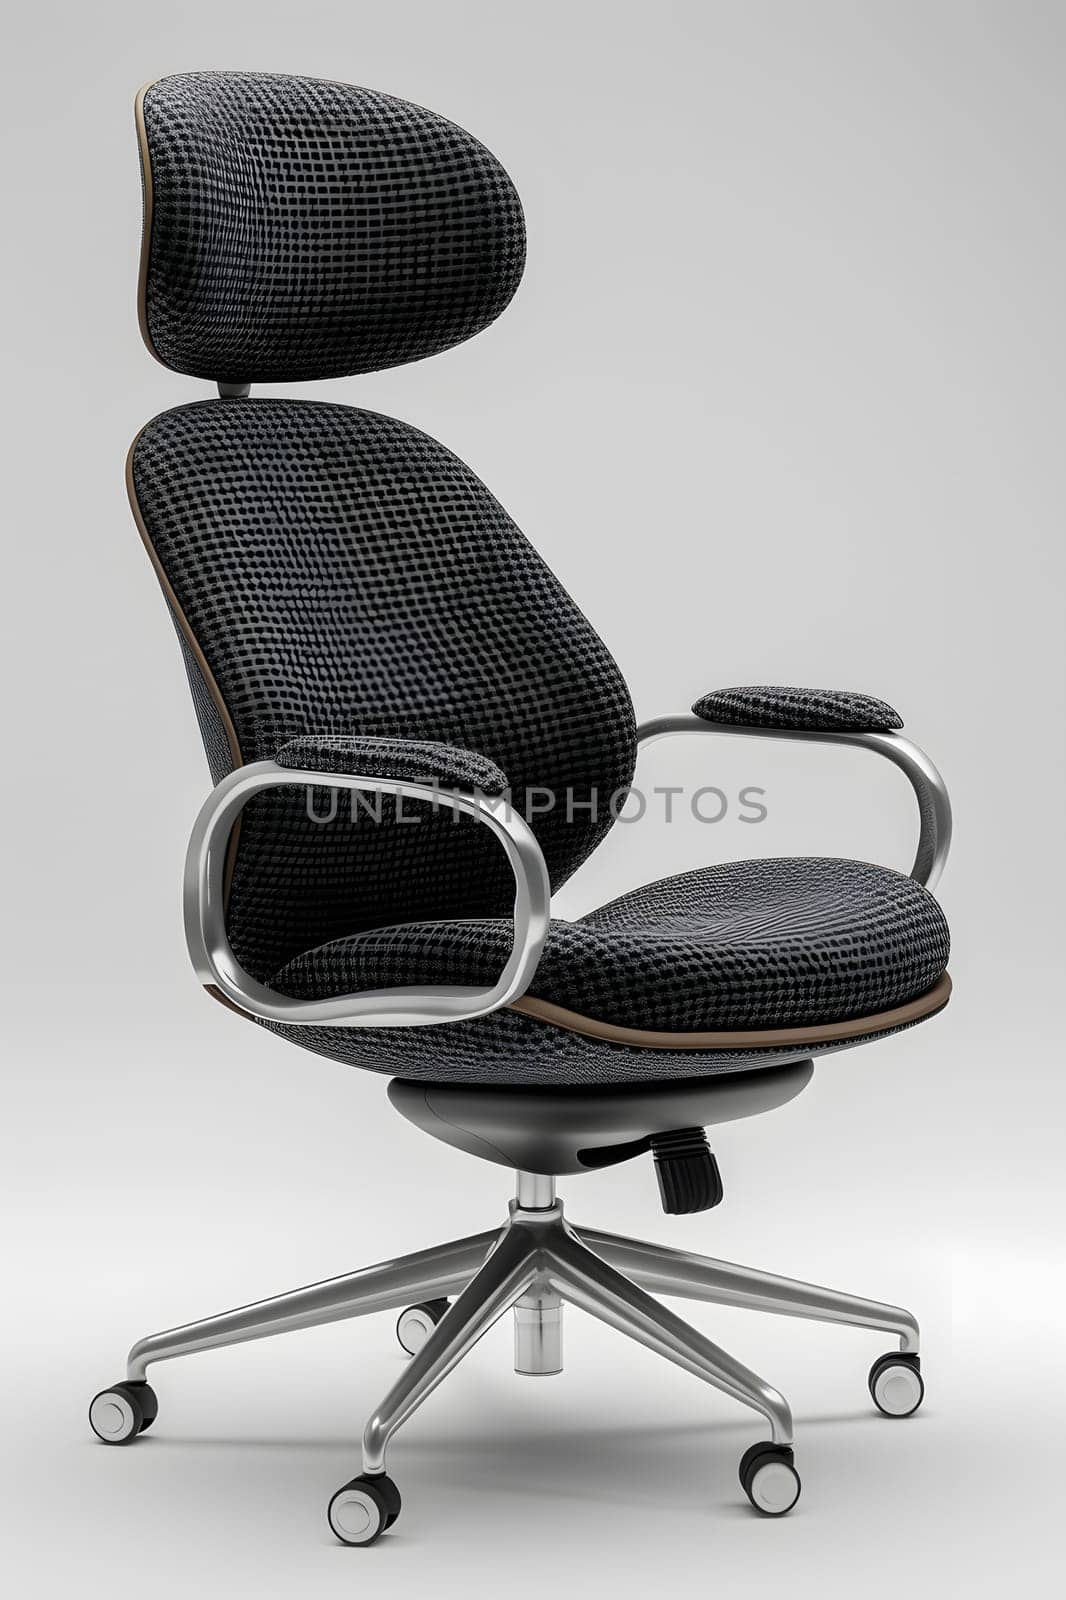 An office chair with wheels and a headrest in a sleek automotive design, featuring comfort, armrests, and an electric blue plastic finish. A stylish and practical addition to any workspace